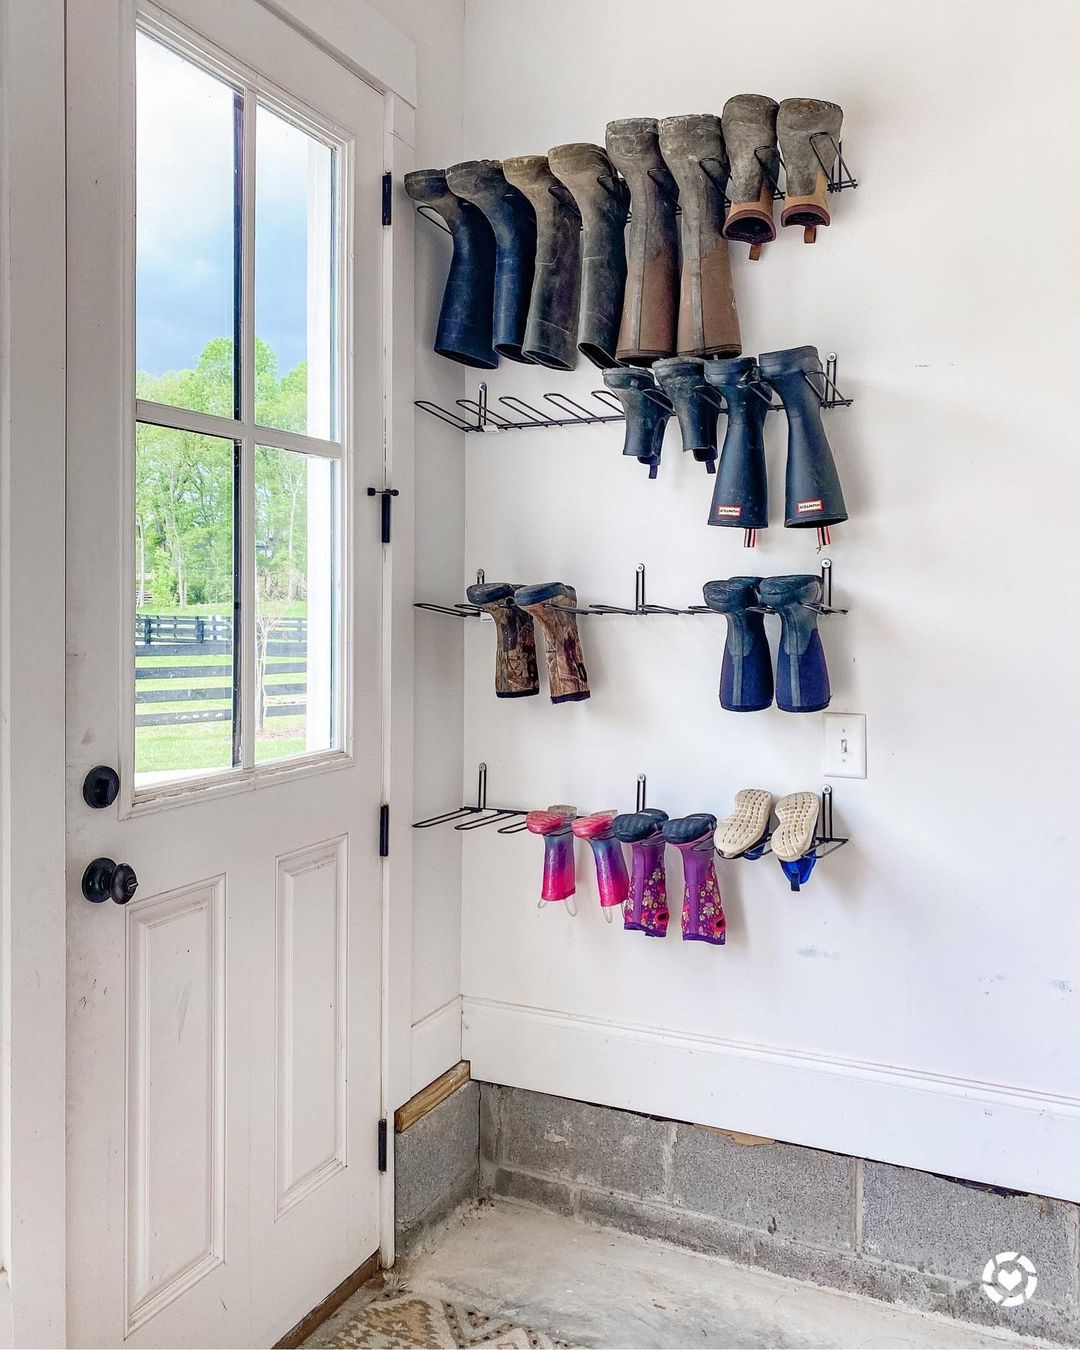 Built-In Shoe Rack How To Video - Checking In With Chelsea